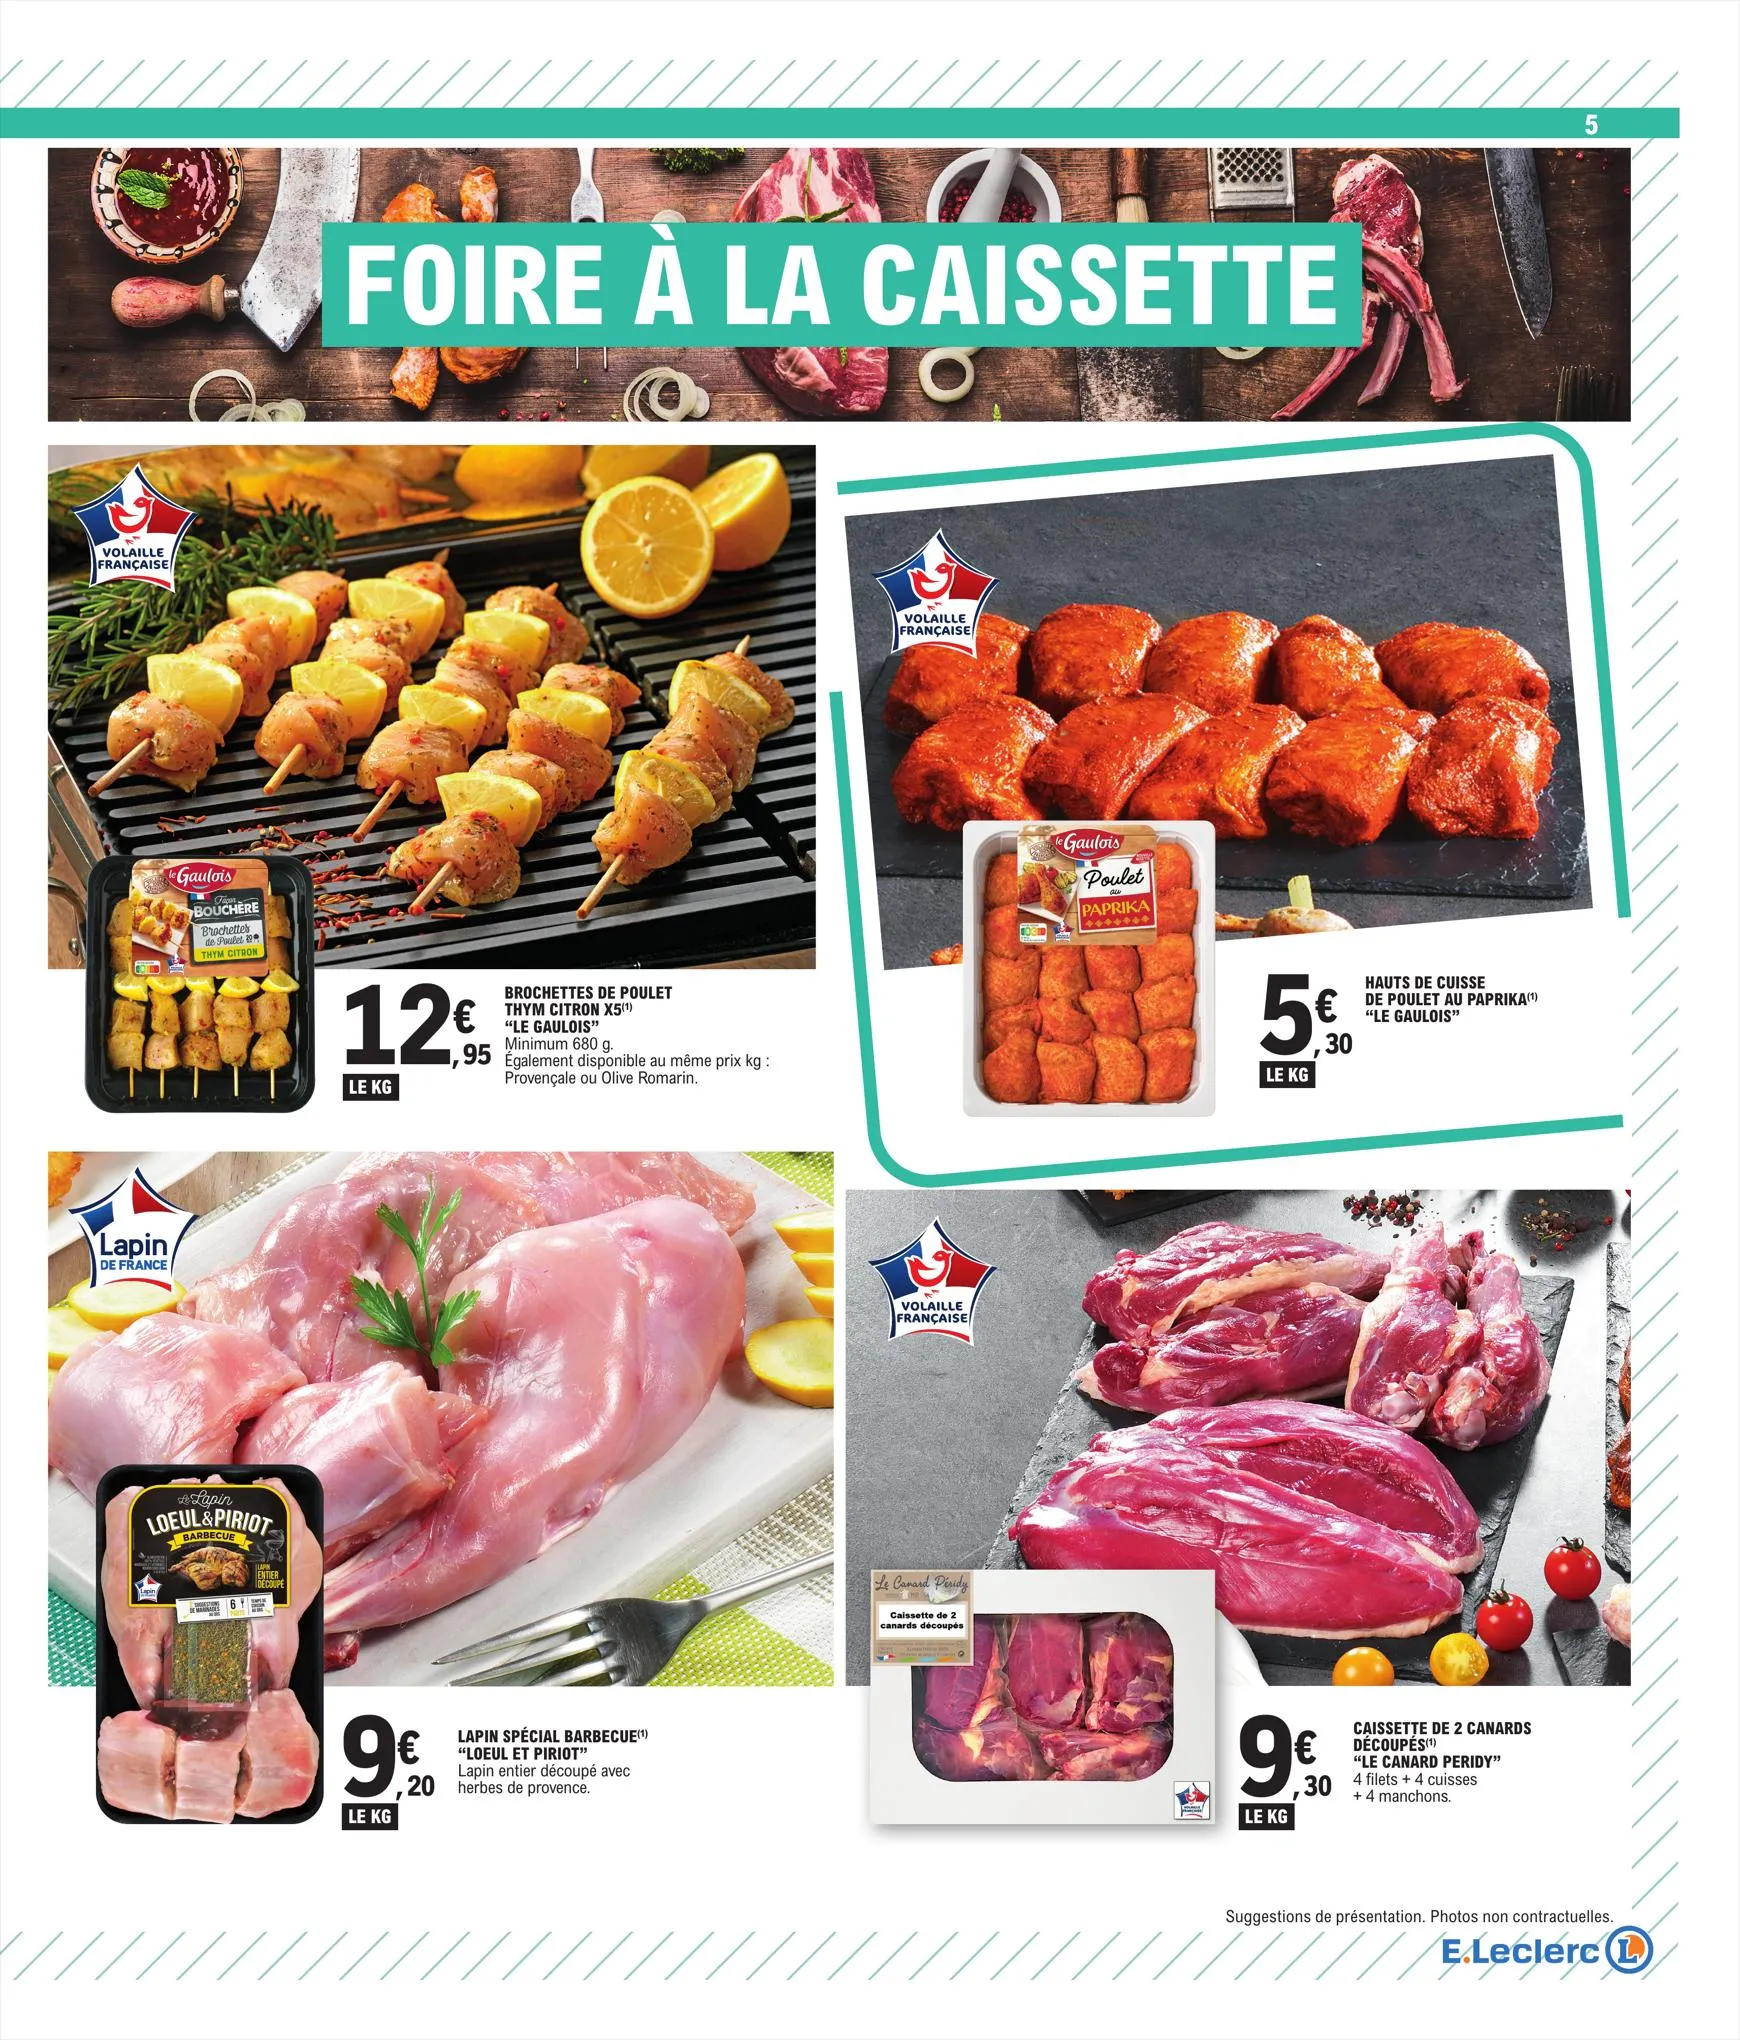 Catalogue Relance Alimentaire 11 - Mixte, page 00005